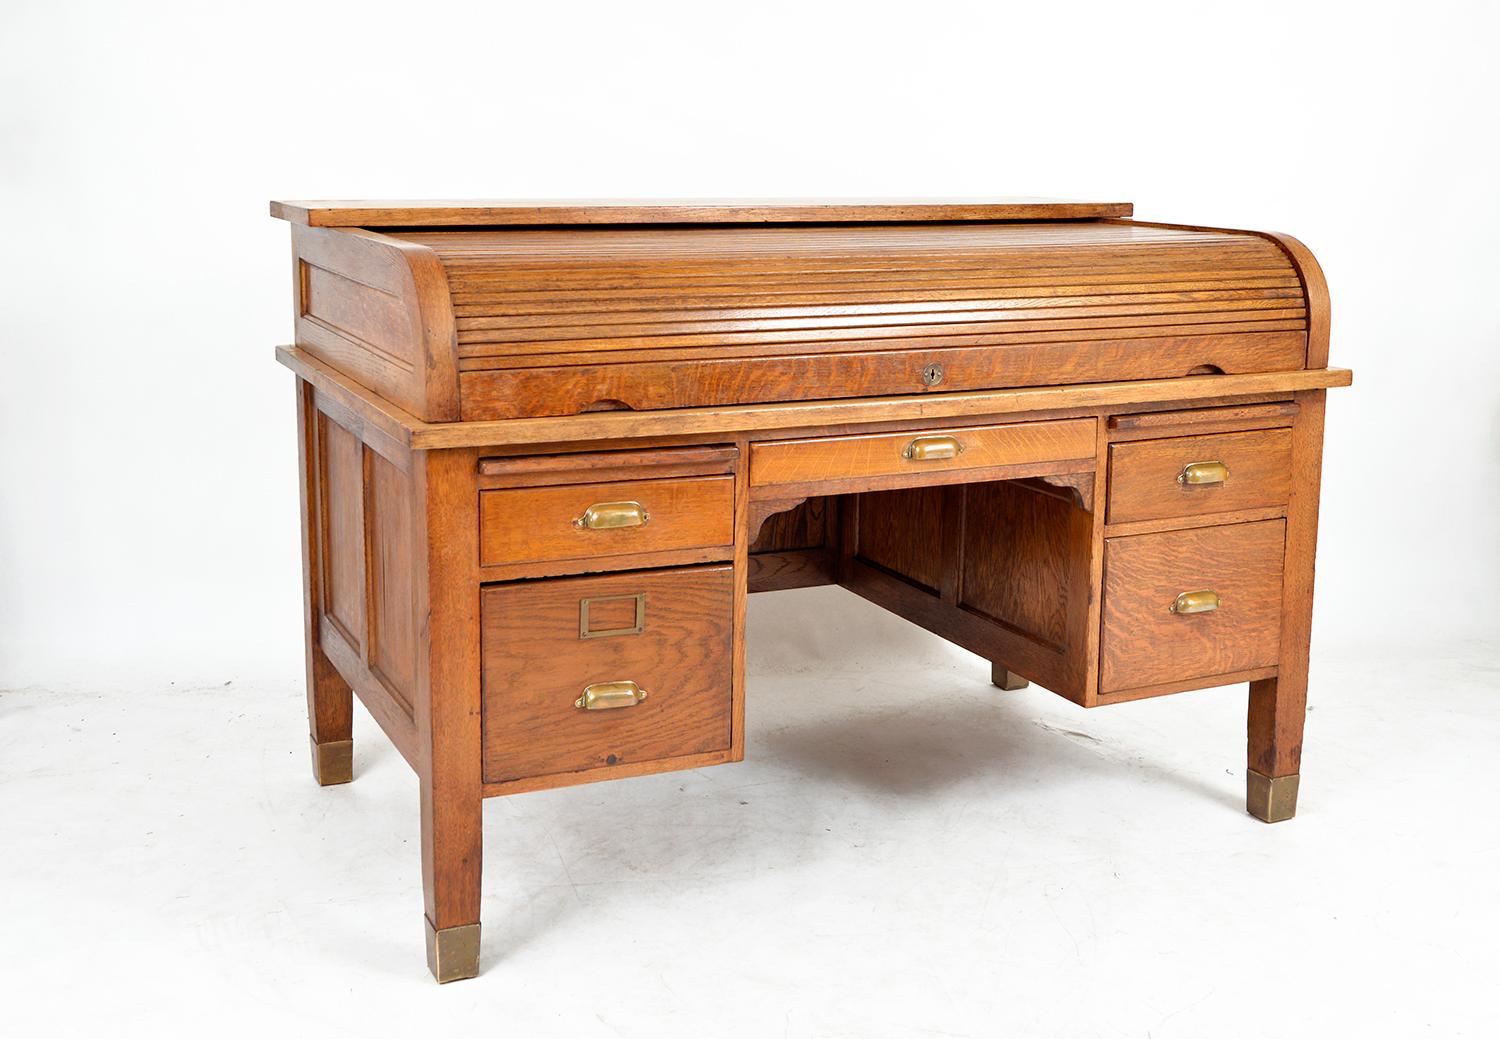 A good example of a 1920s roll top desk in a lovely honey-coloured quarter-sawn oak. It’s a very elegant piece standing on four brass-capped feet, giving it an airy sophistication. 
The tambour rolls back into the desk to reveal a smooth desktop,